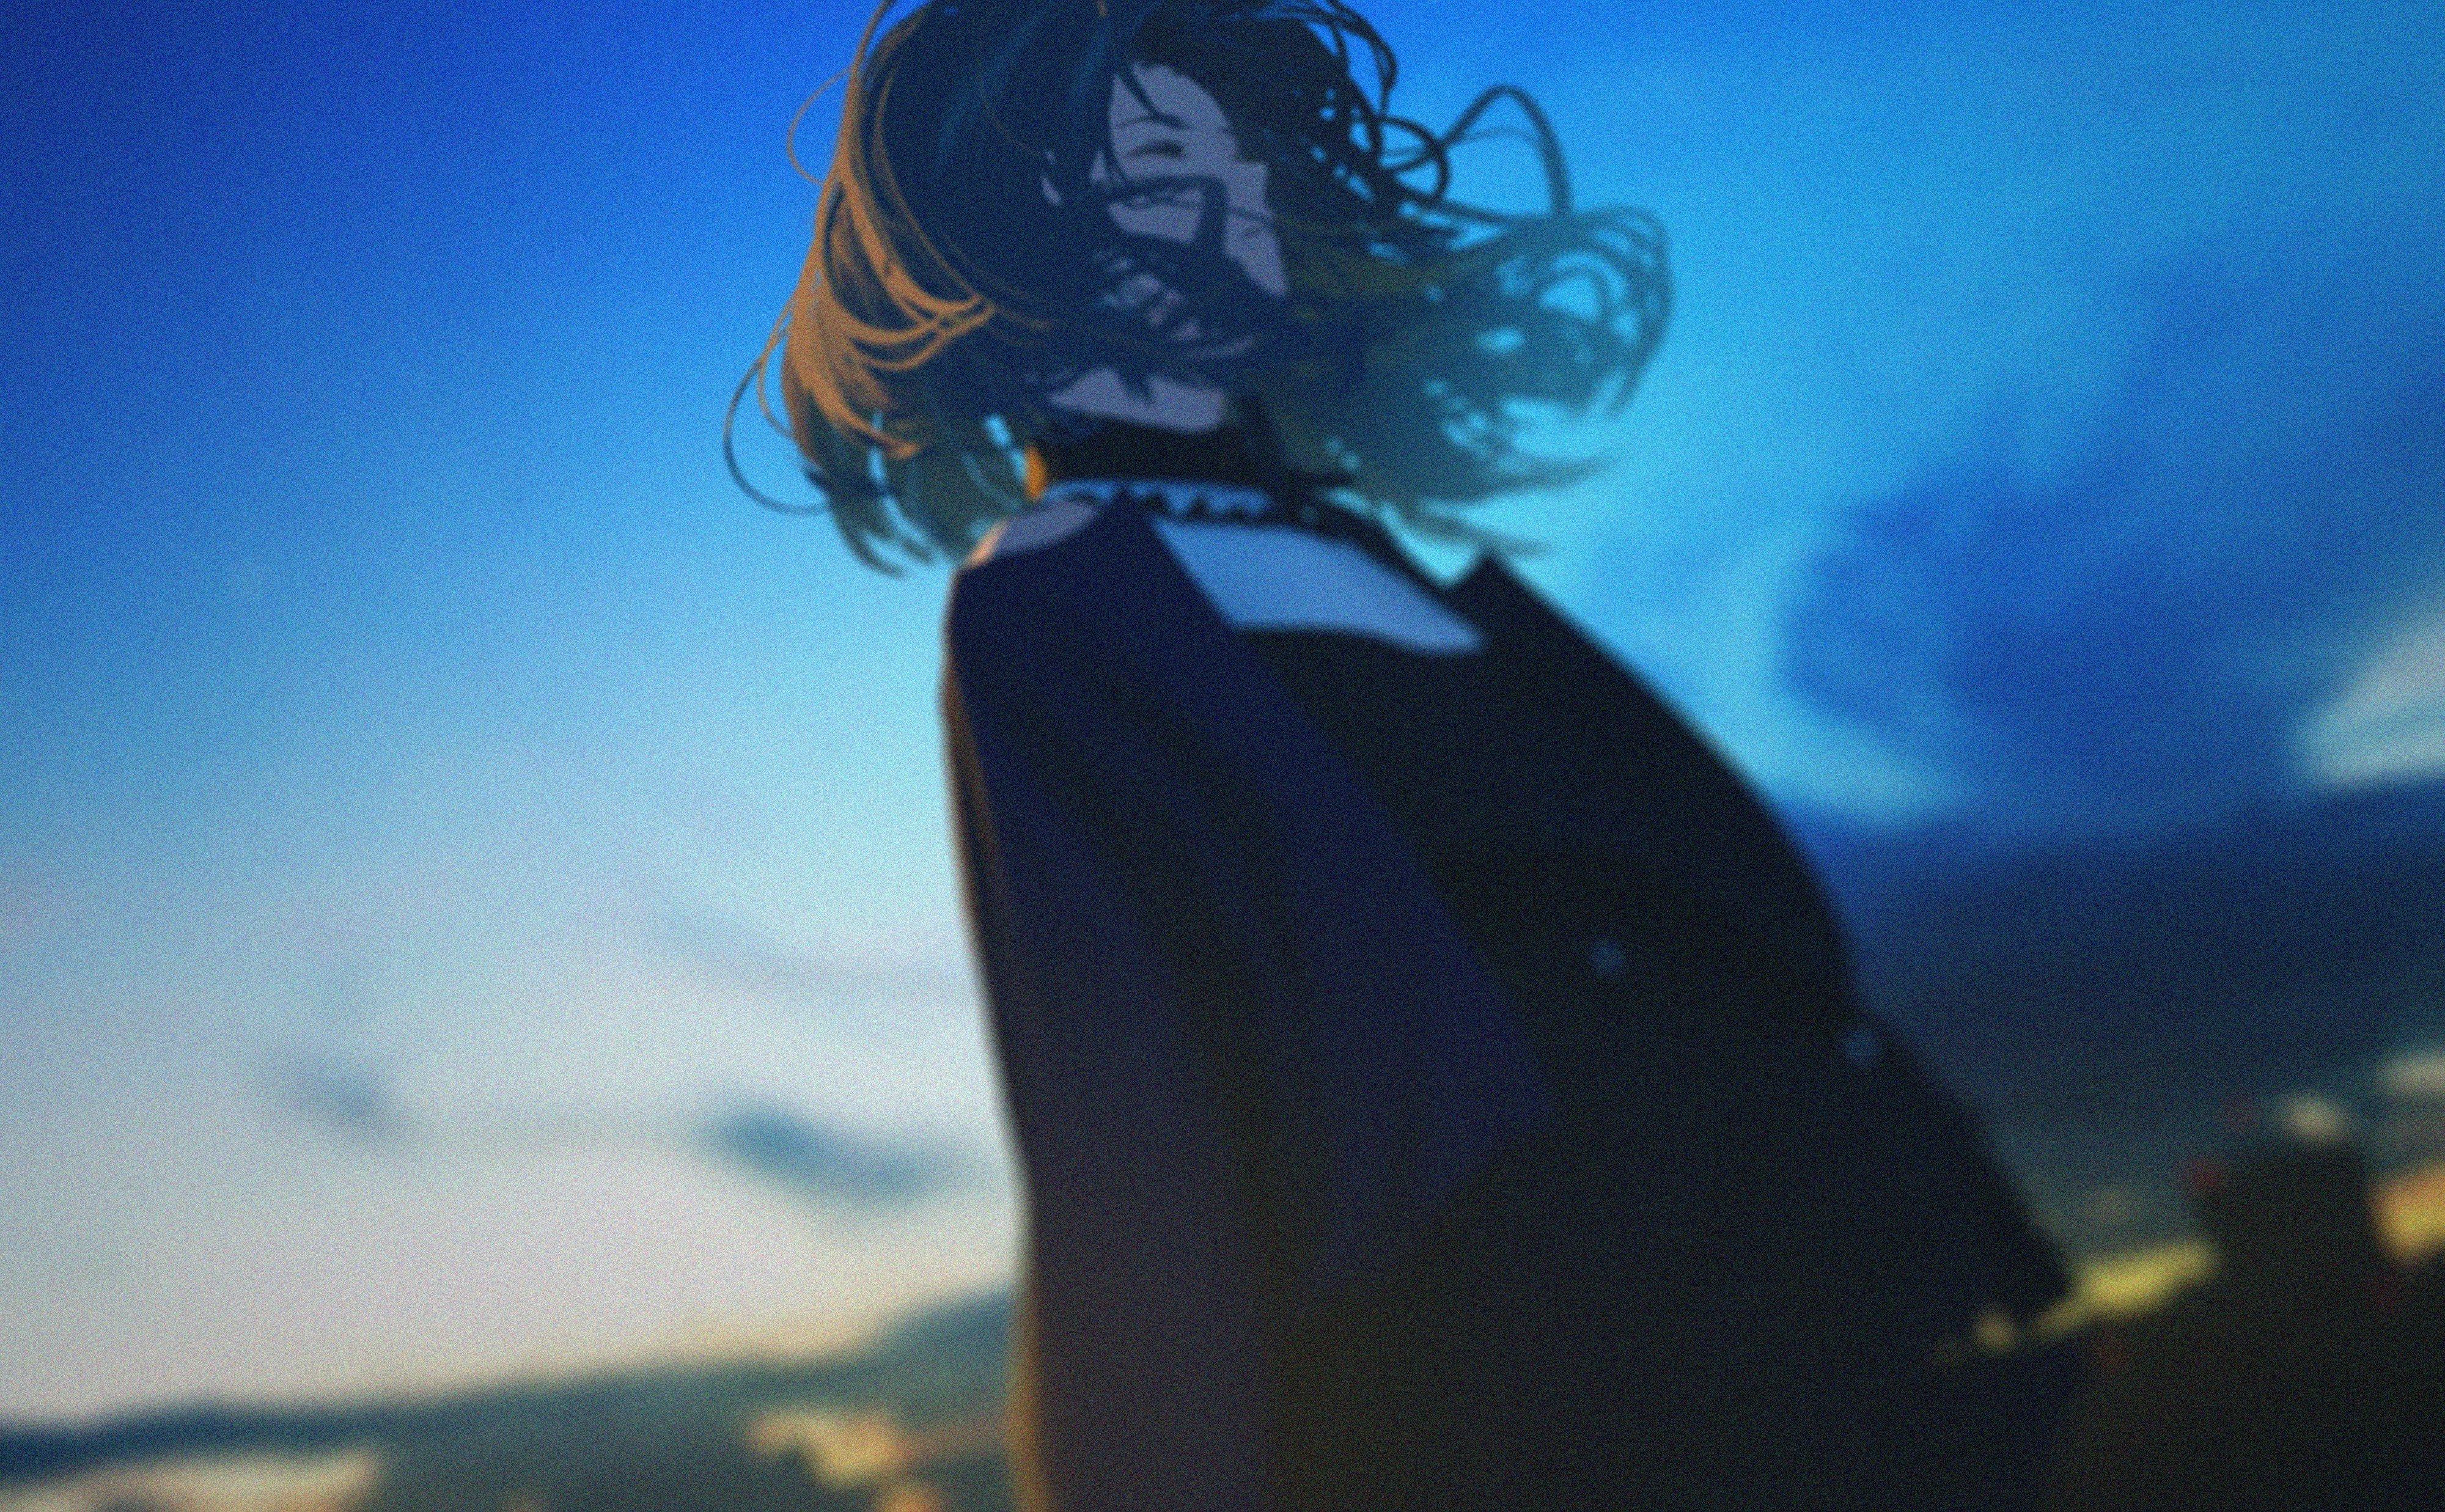 Anime 4000x2474 anime anime girls Hoshimachi Suisei Hololive sky clouds long hair closed eyes blue hair dress noise blurred Pixiv